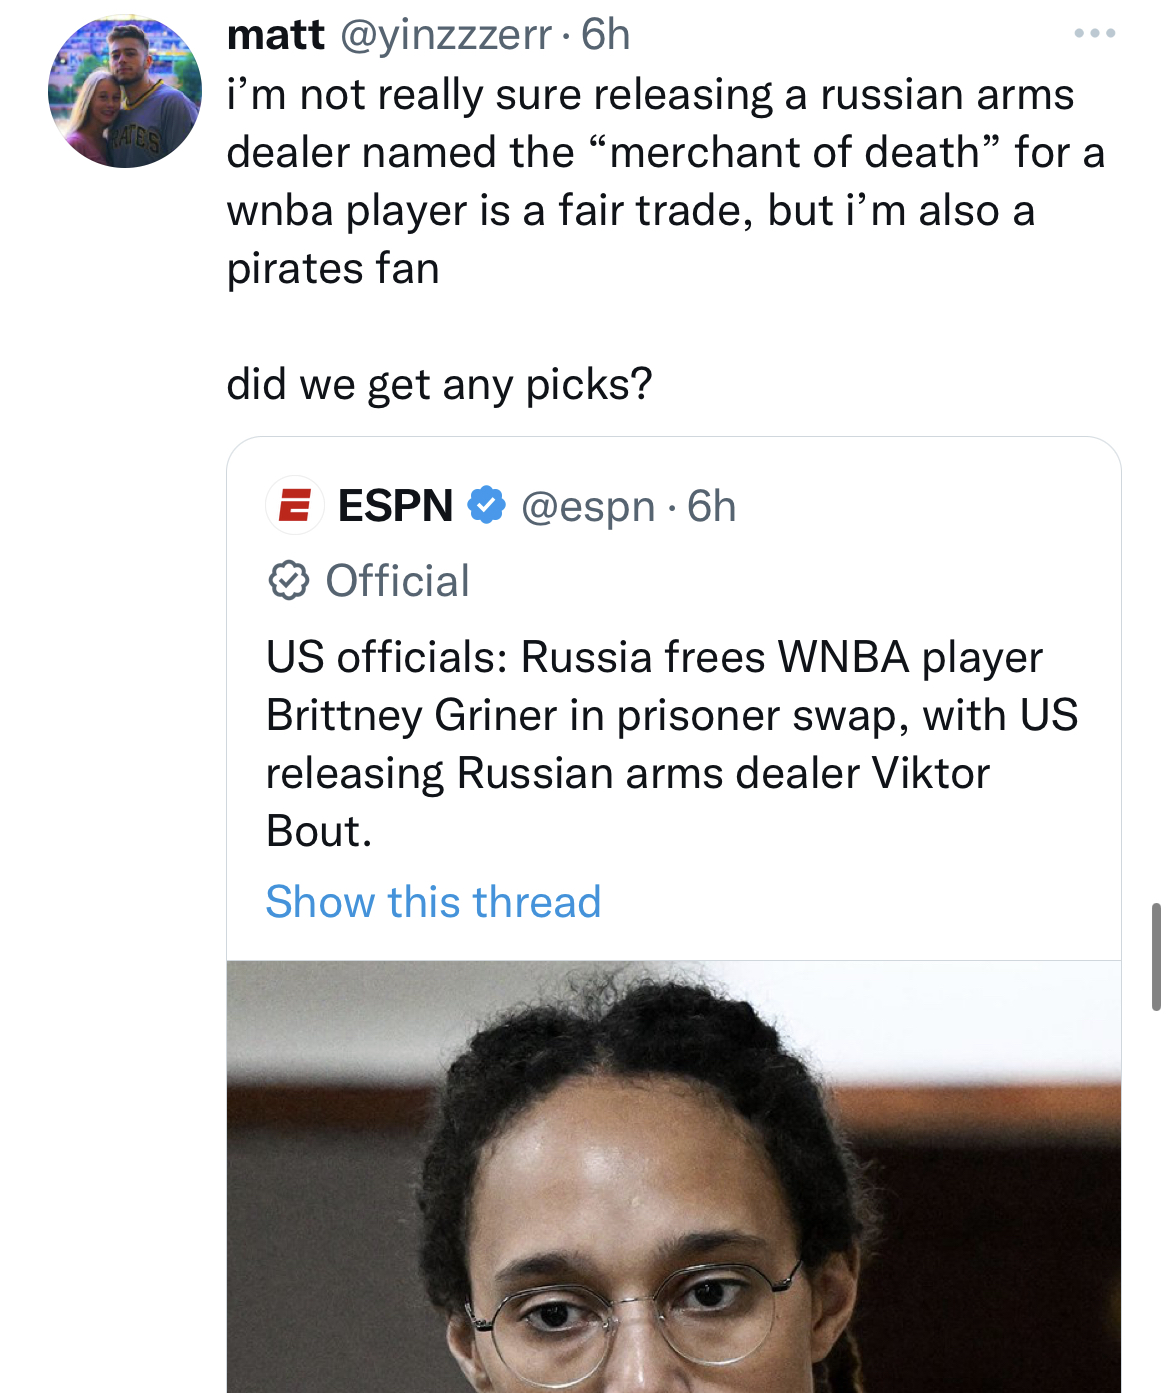 Tweets dunking on celebs - head - matt.6h i'm not really sure releasing a russian arms dealer named the "merchant of death" for a wnba player is a fair trade, but i'm also a pirates fan did we get any picks? E Espn .6h Official Us officials Russia frees W